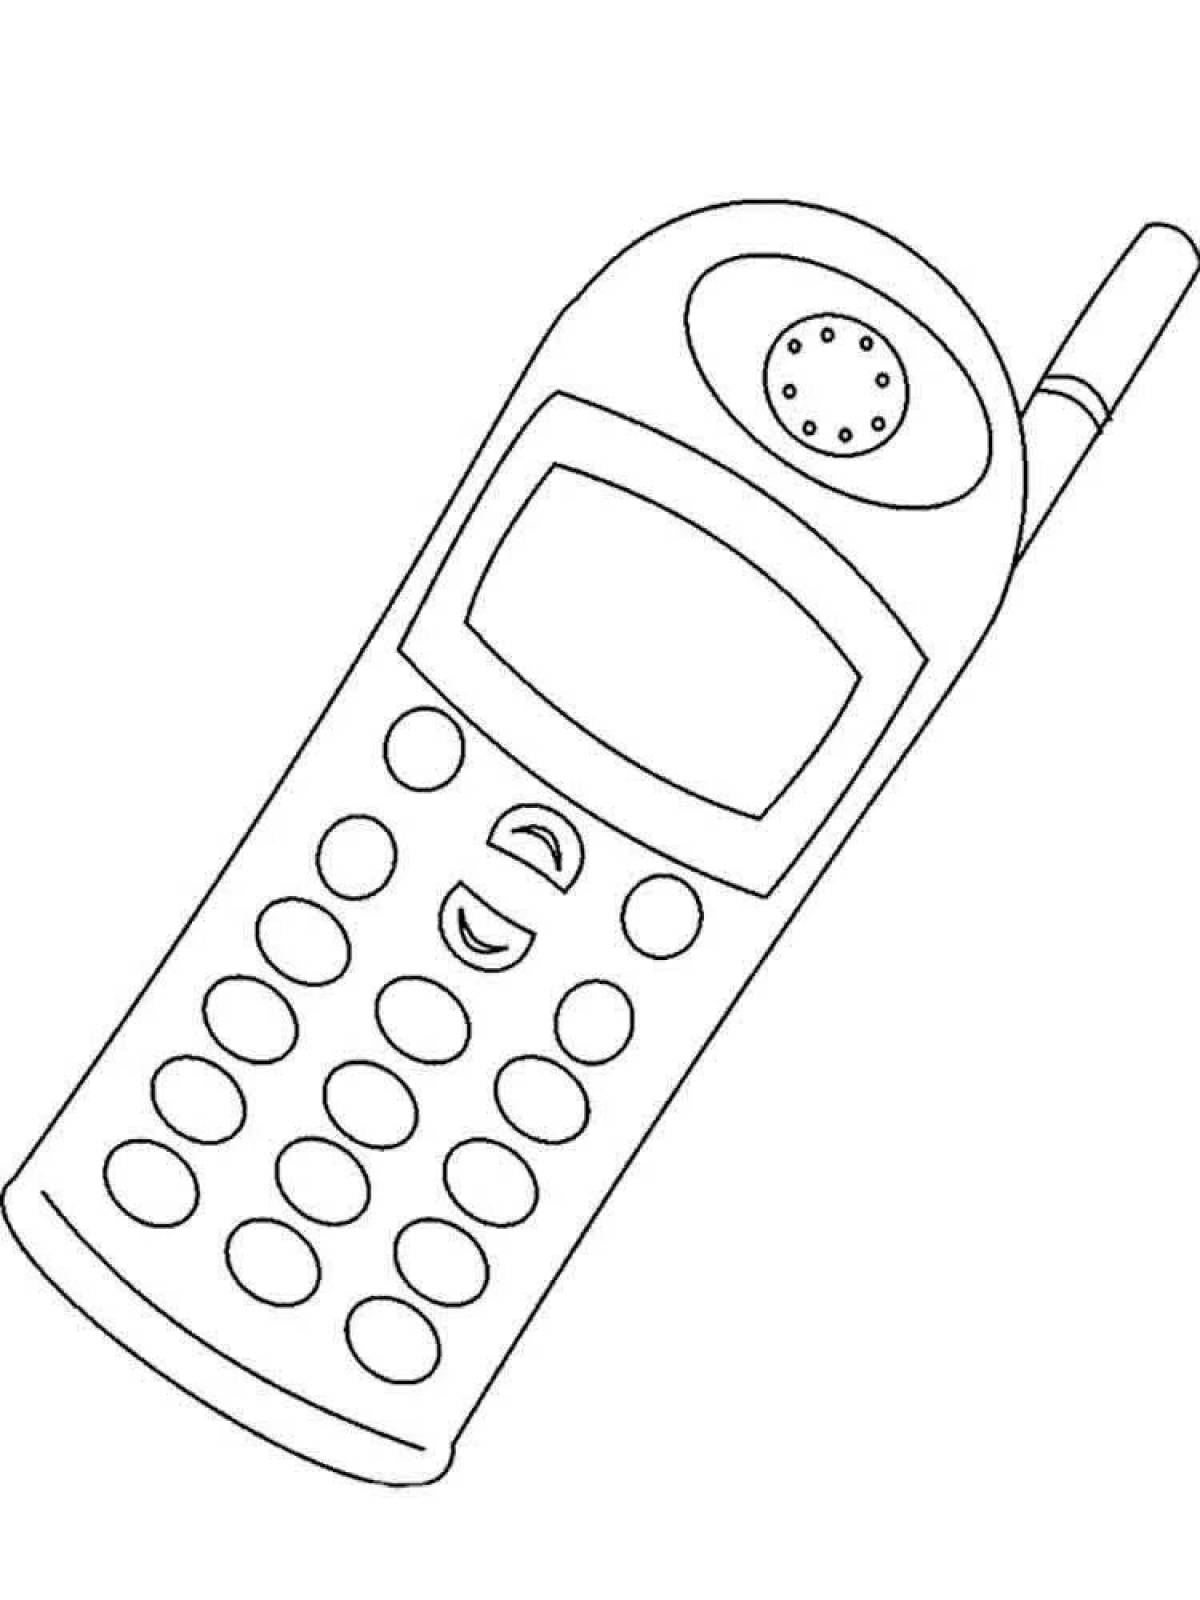 Delightful mobile phone coloring page